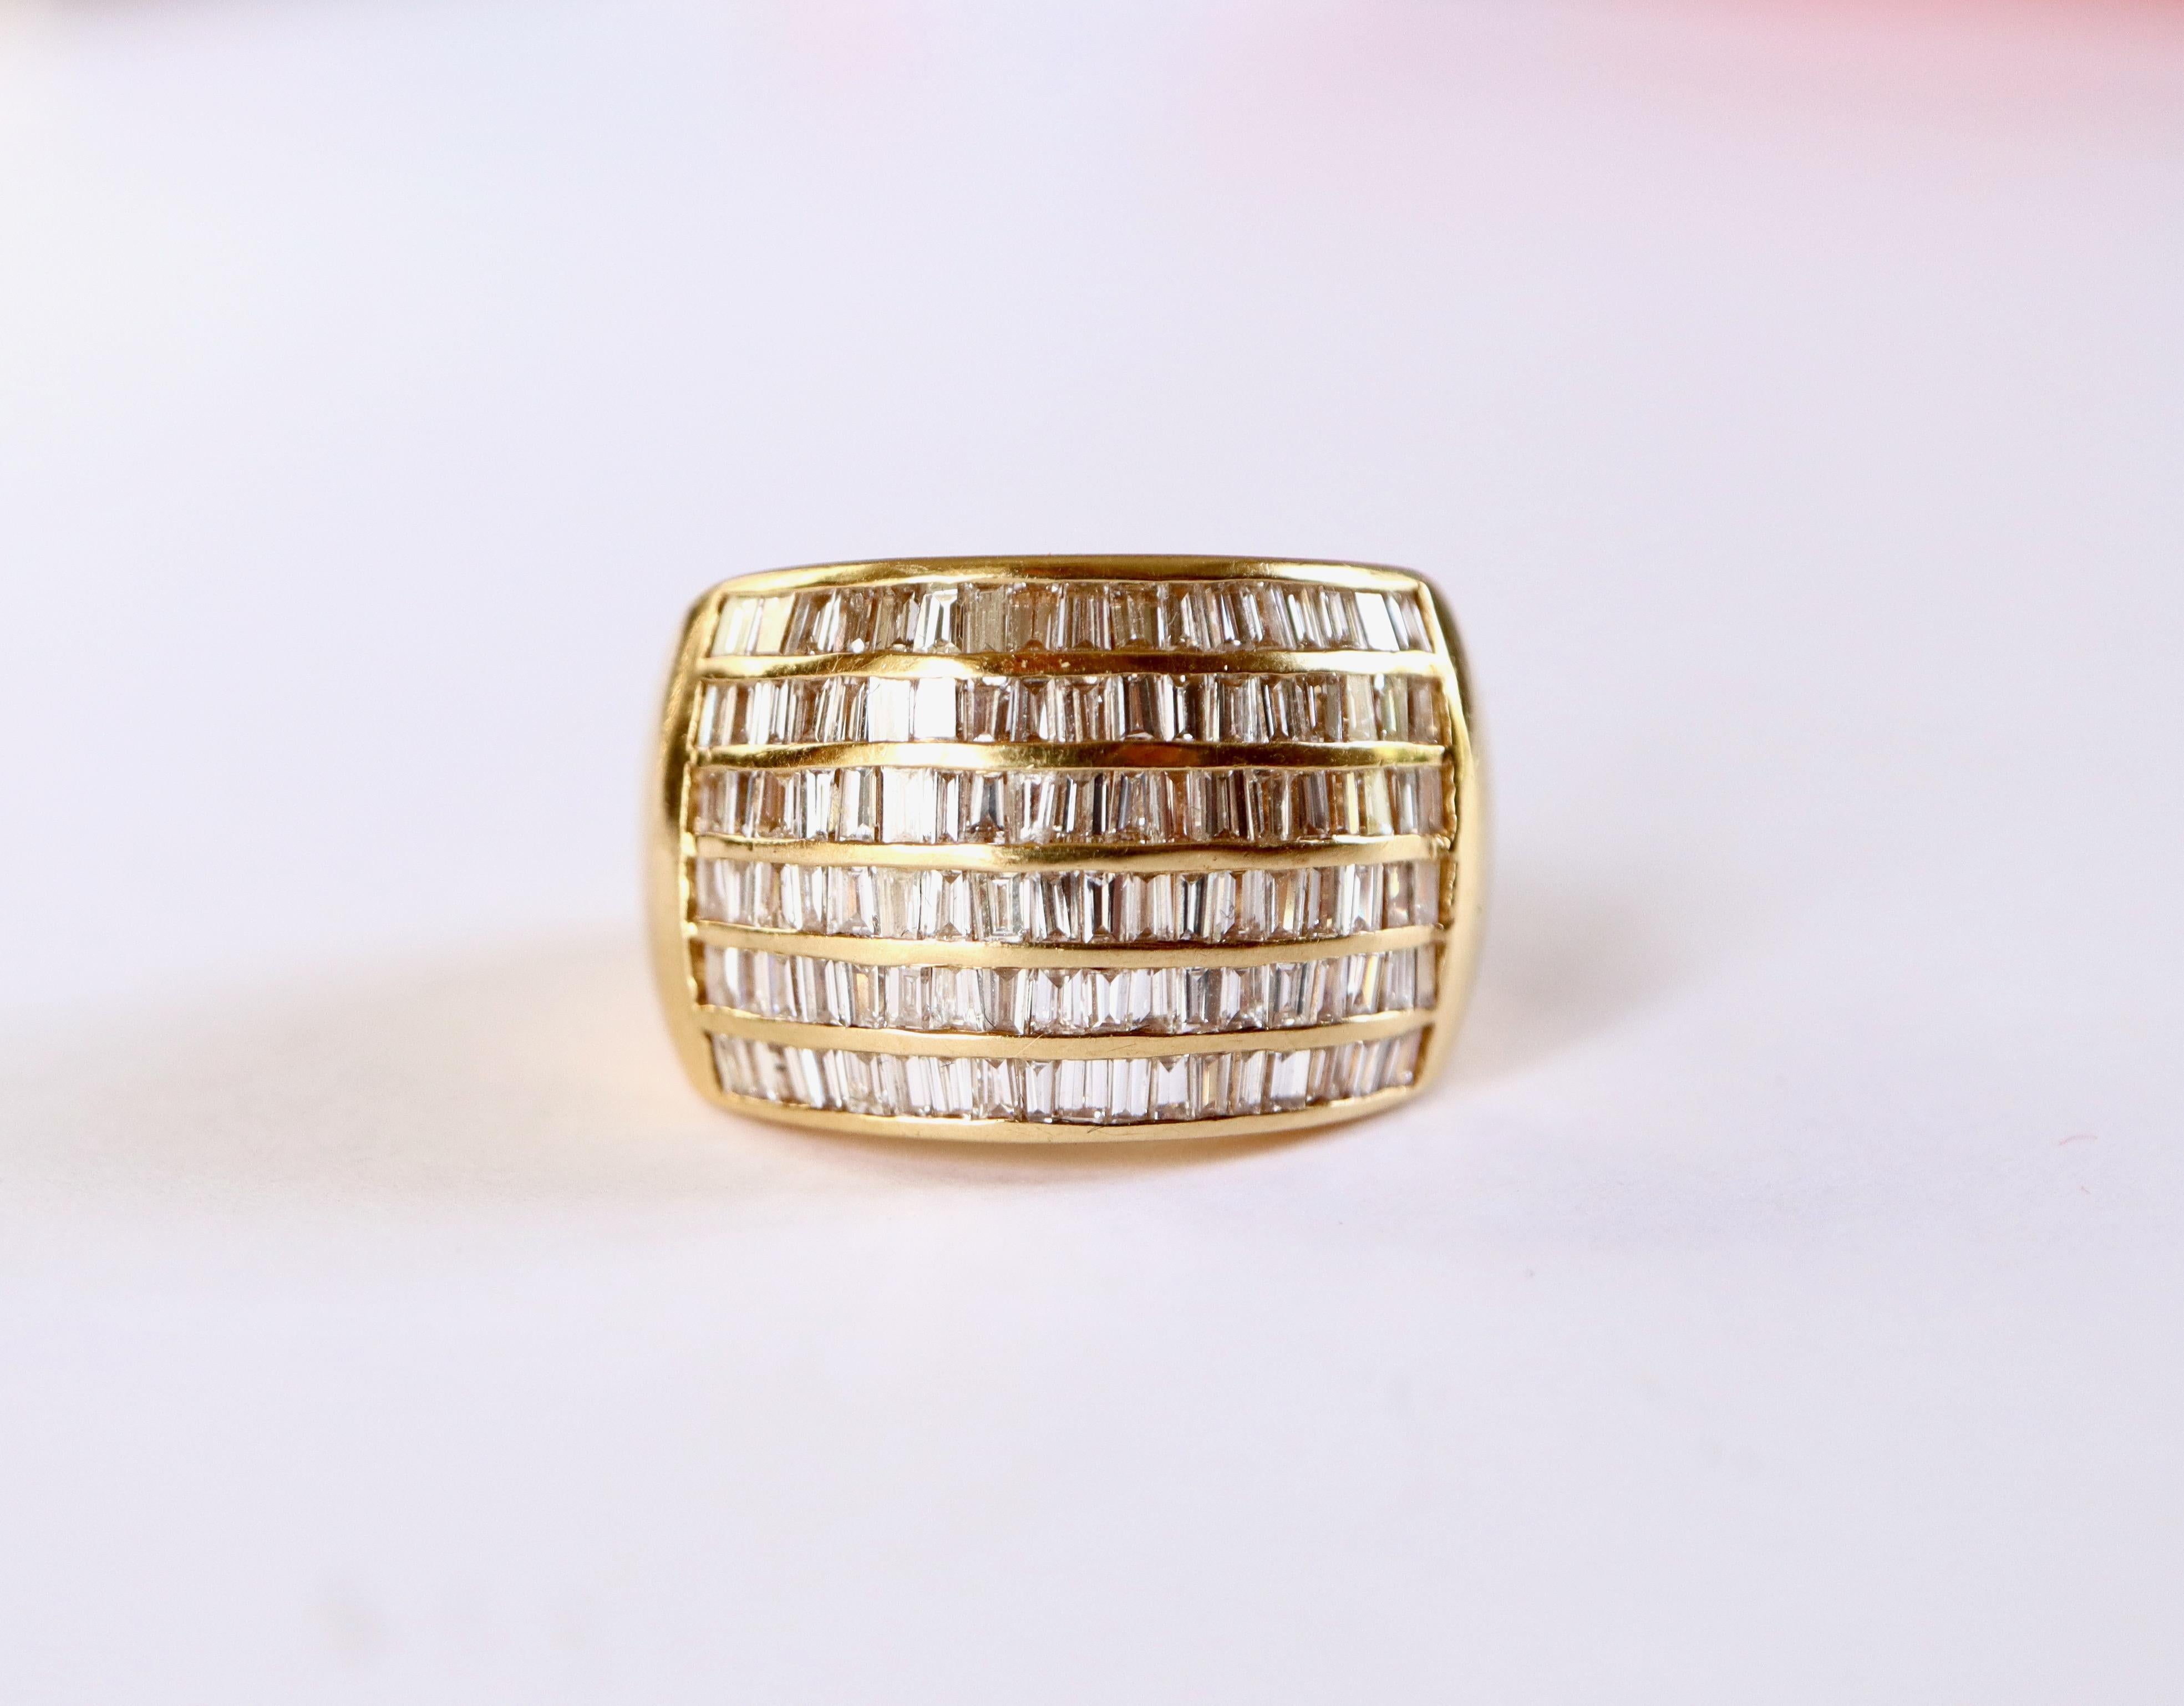 Ring in 18-carat yellow gold and baguette diamonds. The ring is made up of 6 rows of baguette diamonds on the front of the ring for a total diamond weight of 1.5 to 2 carats.
Eagle head hallmark. French work
Diameter: 18 mm FR size: 55.5 to 56 US